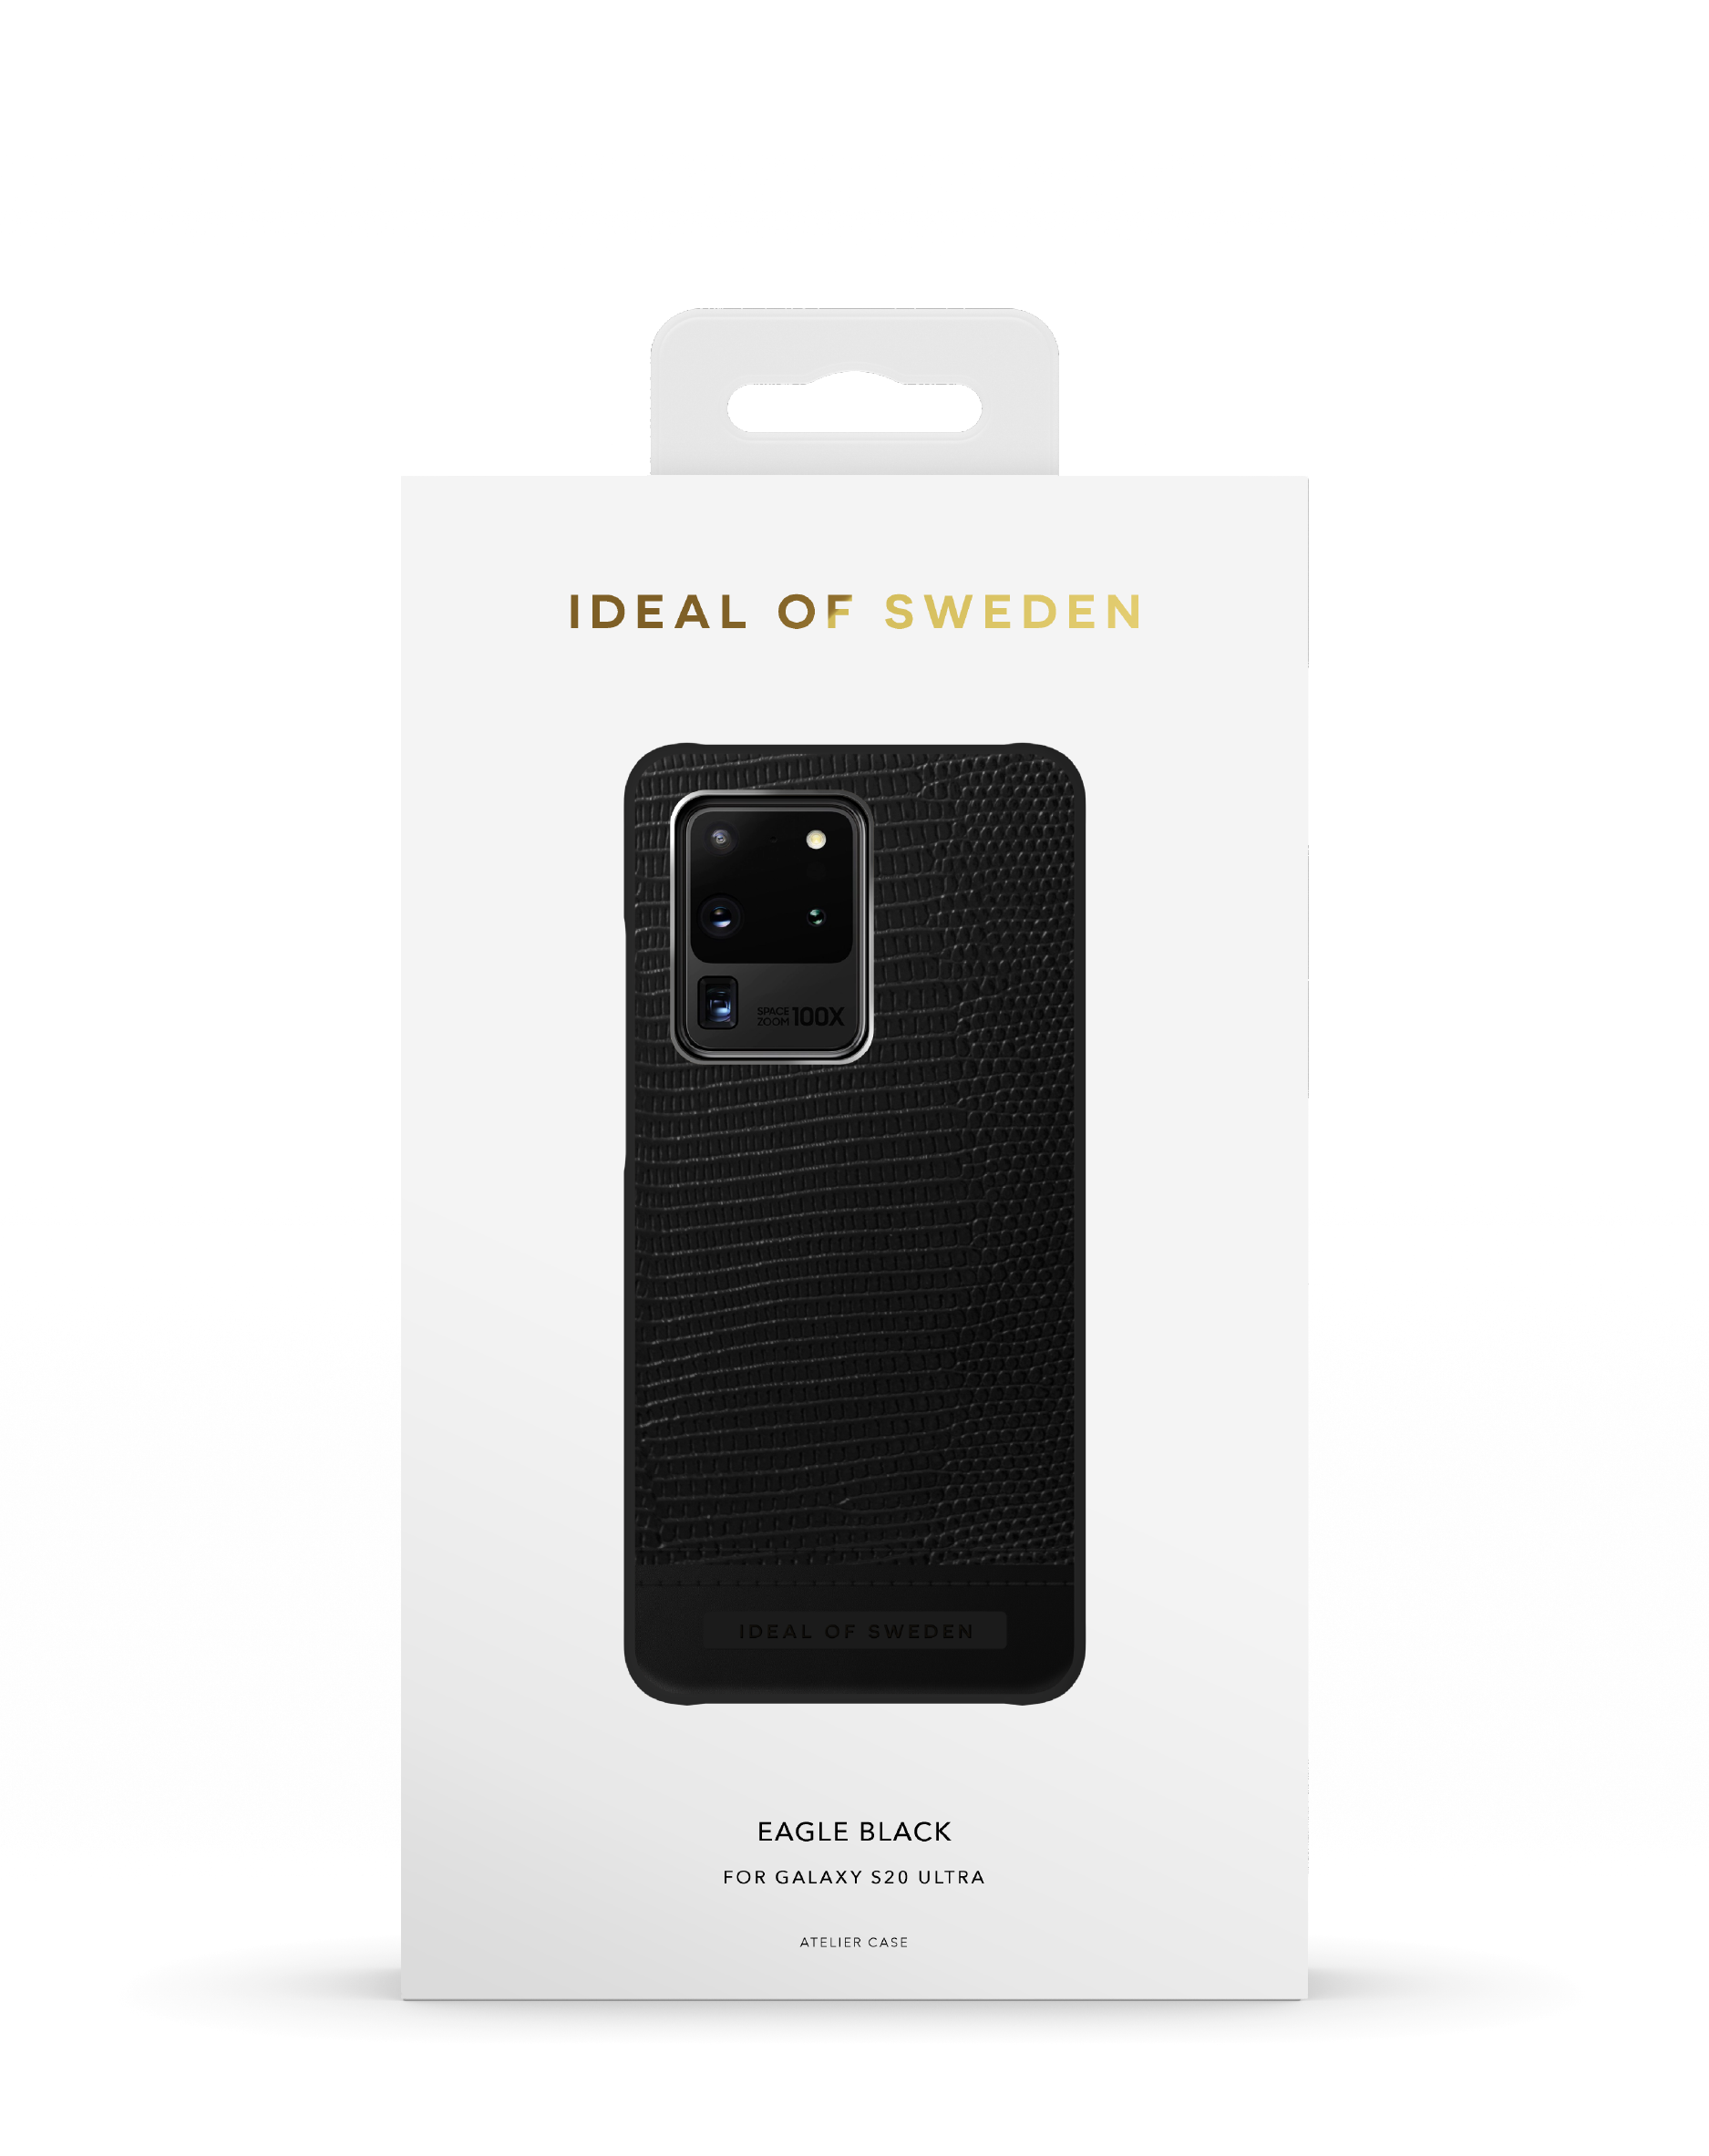 Galaxy Full OF SWEDEN Black IDEAL Cover, Eagle S20+, IDUWAW20-S11-229, Samsung,